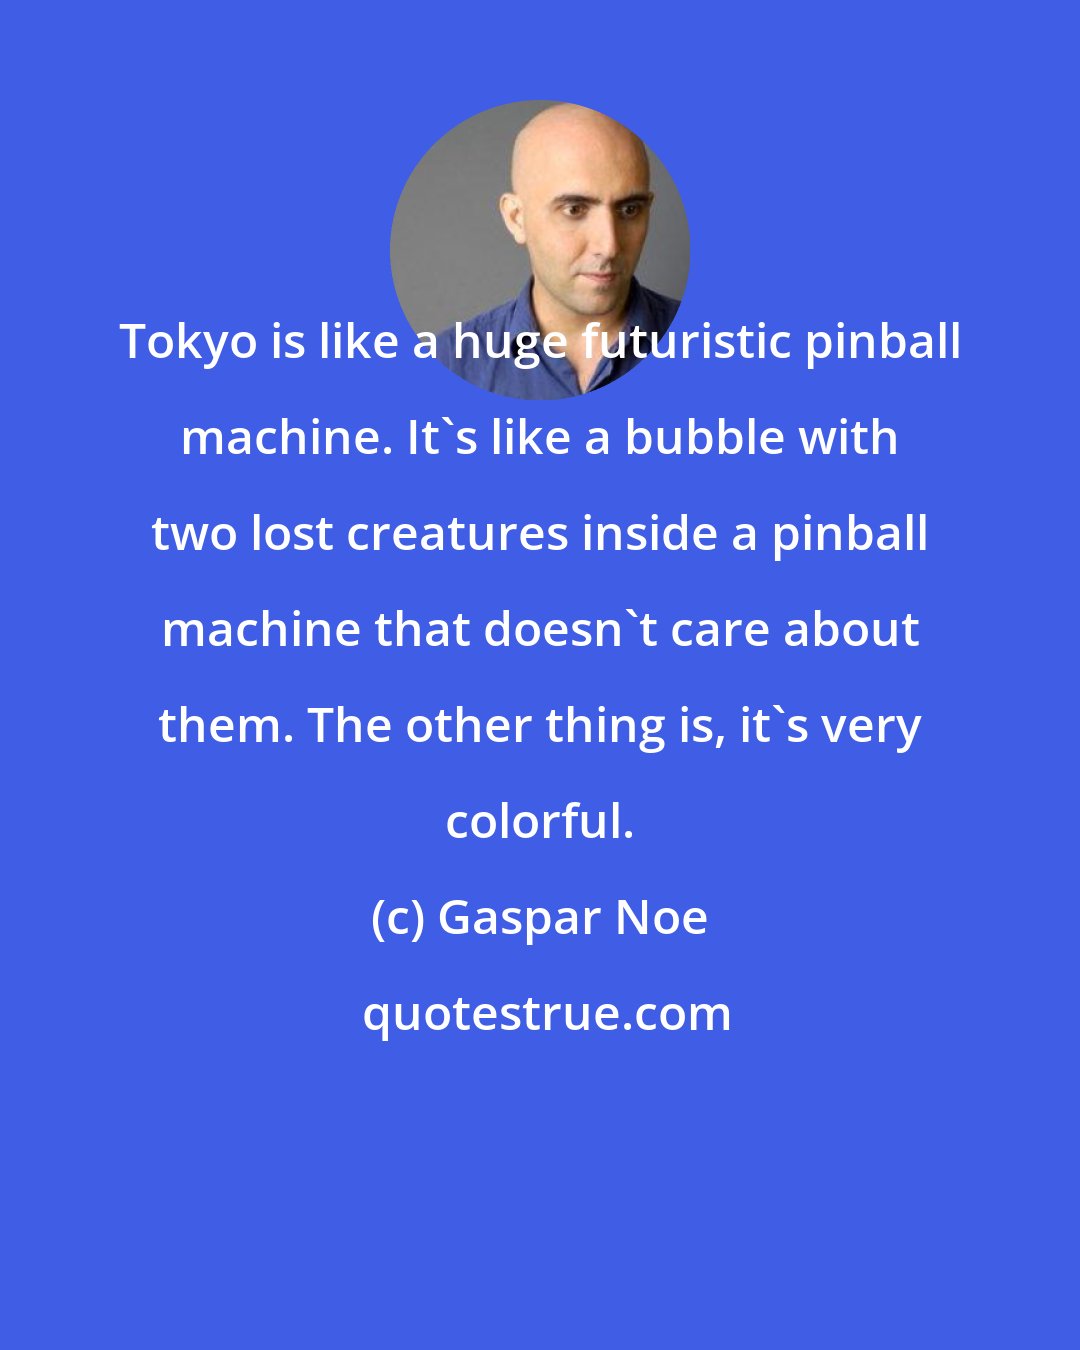 Gaspar Noe: Tokyo is like a huge futuristic pinball machine. It's like a bubble with two lost creatures inside a pinball machine that doesn't care about them. The other thing is, it's very colorful.